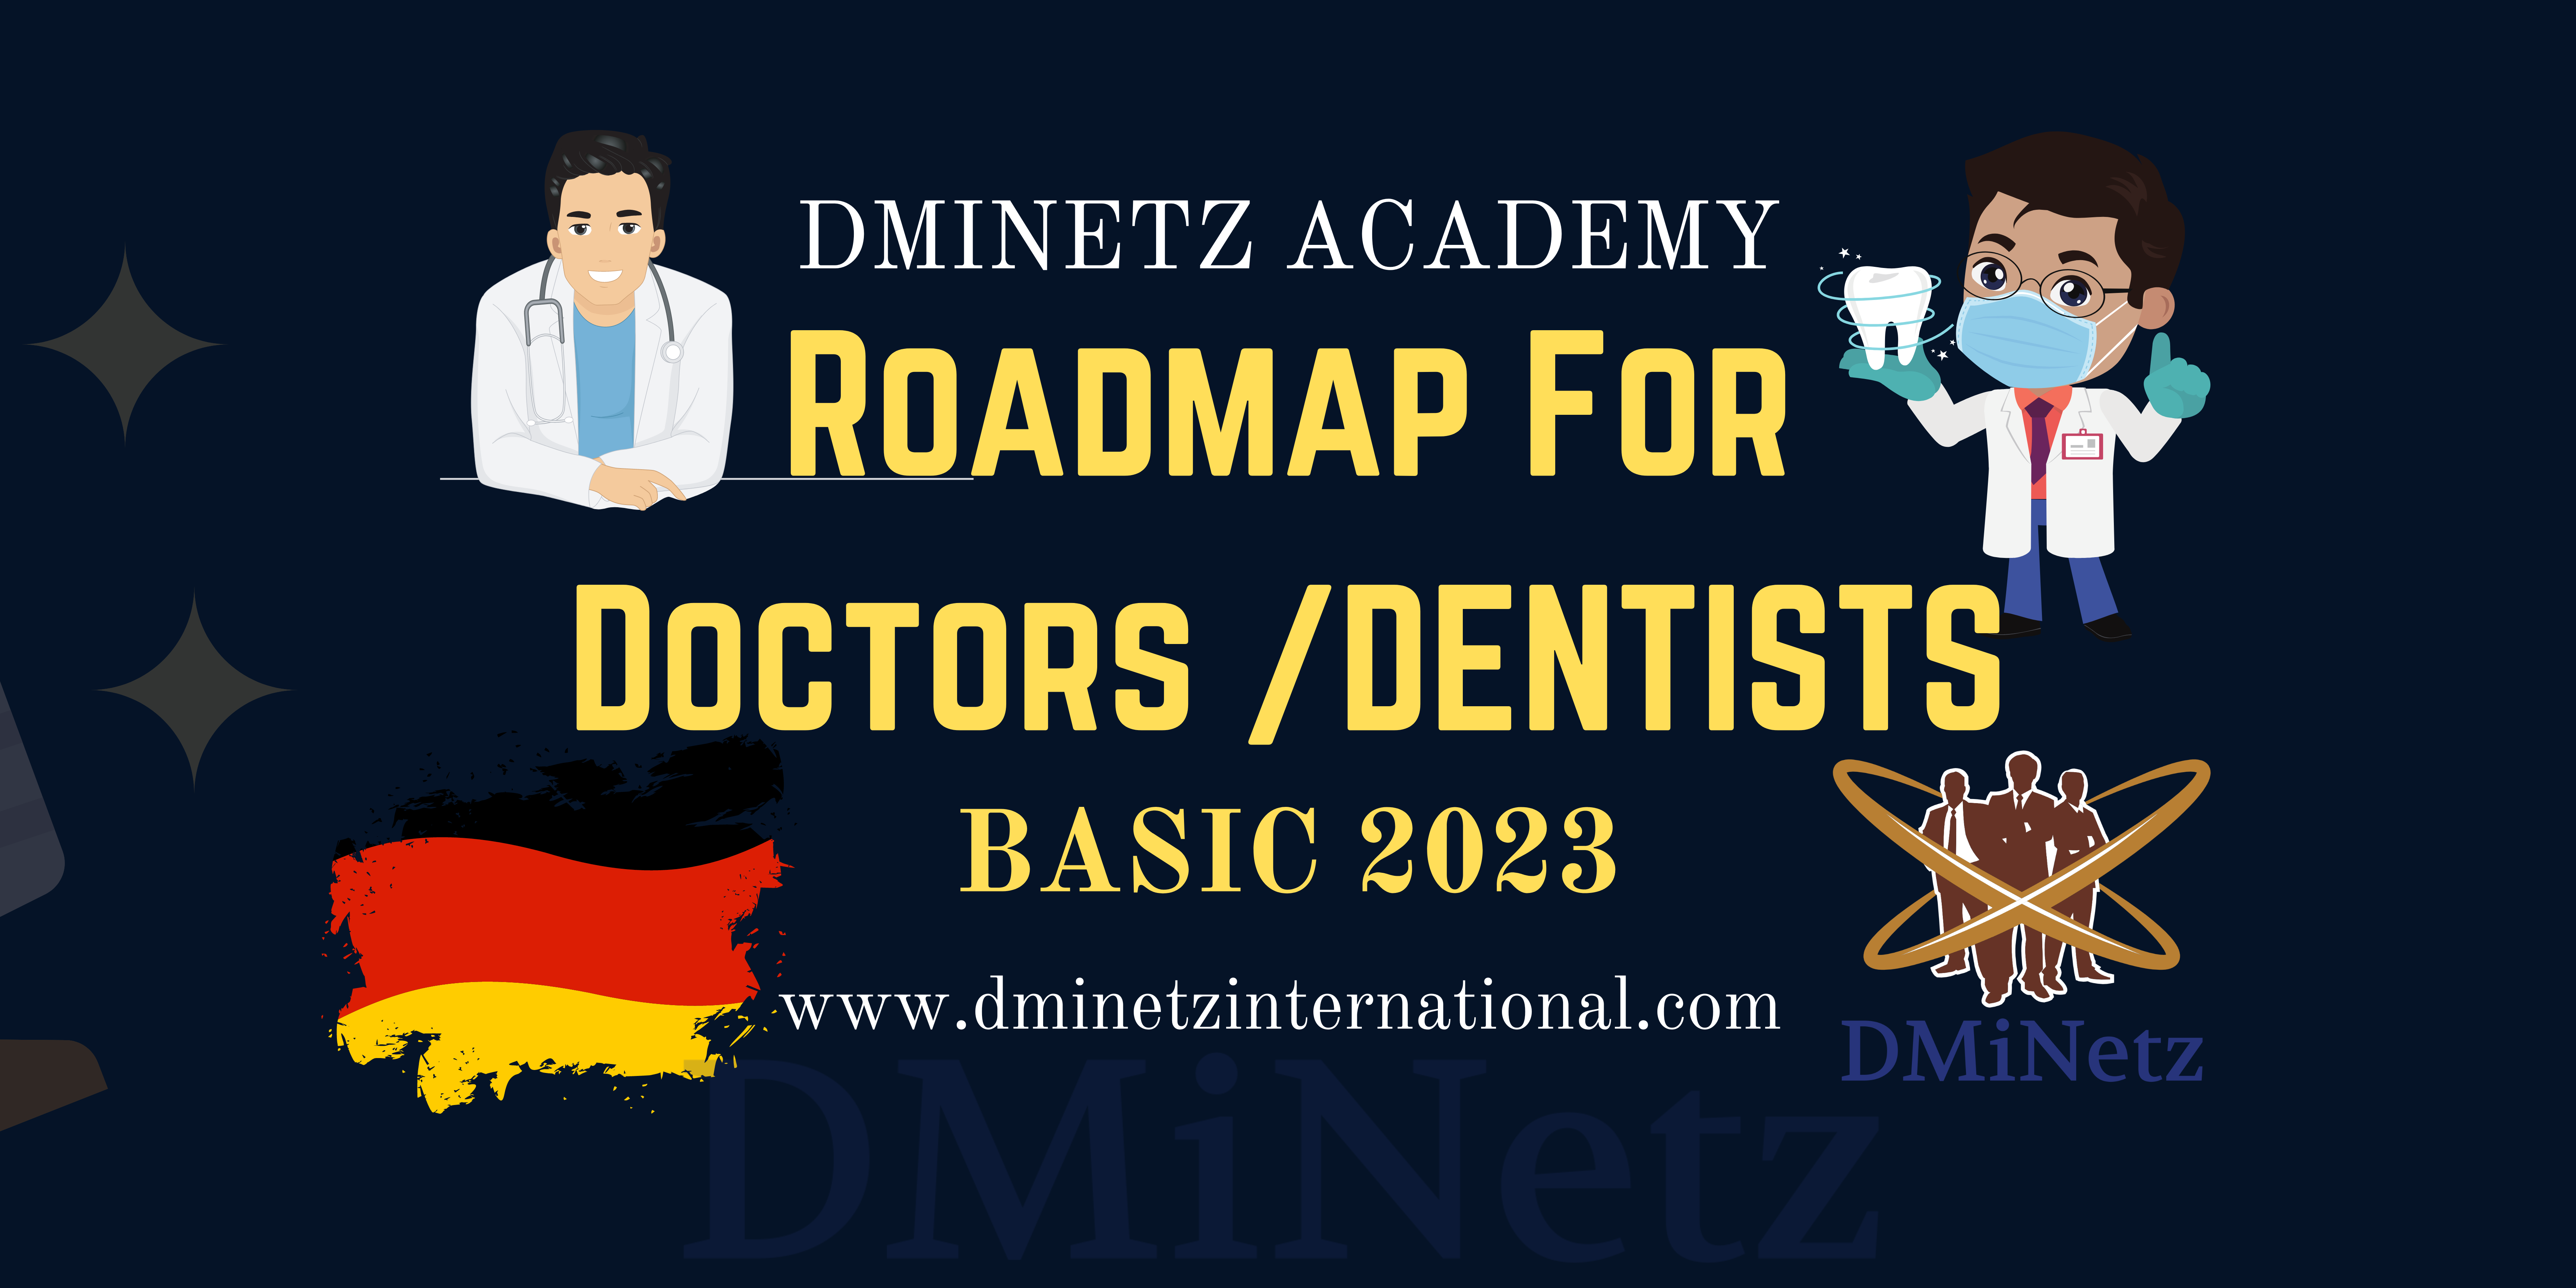 Roadmap for Doctors and Dentists coming to Germany